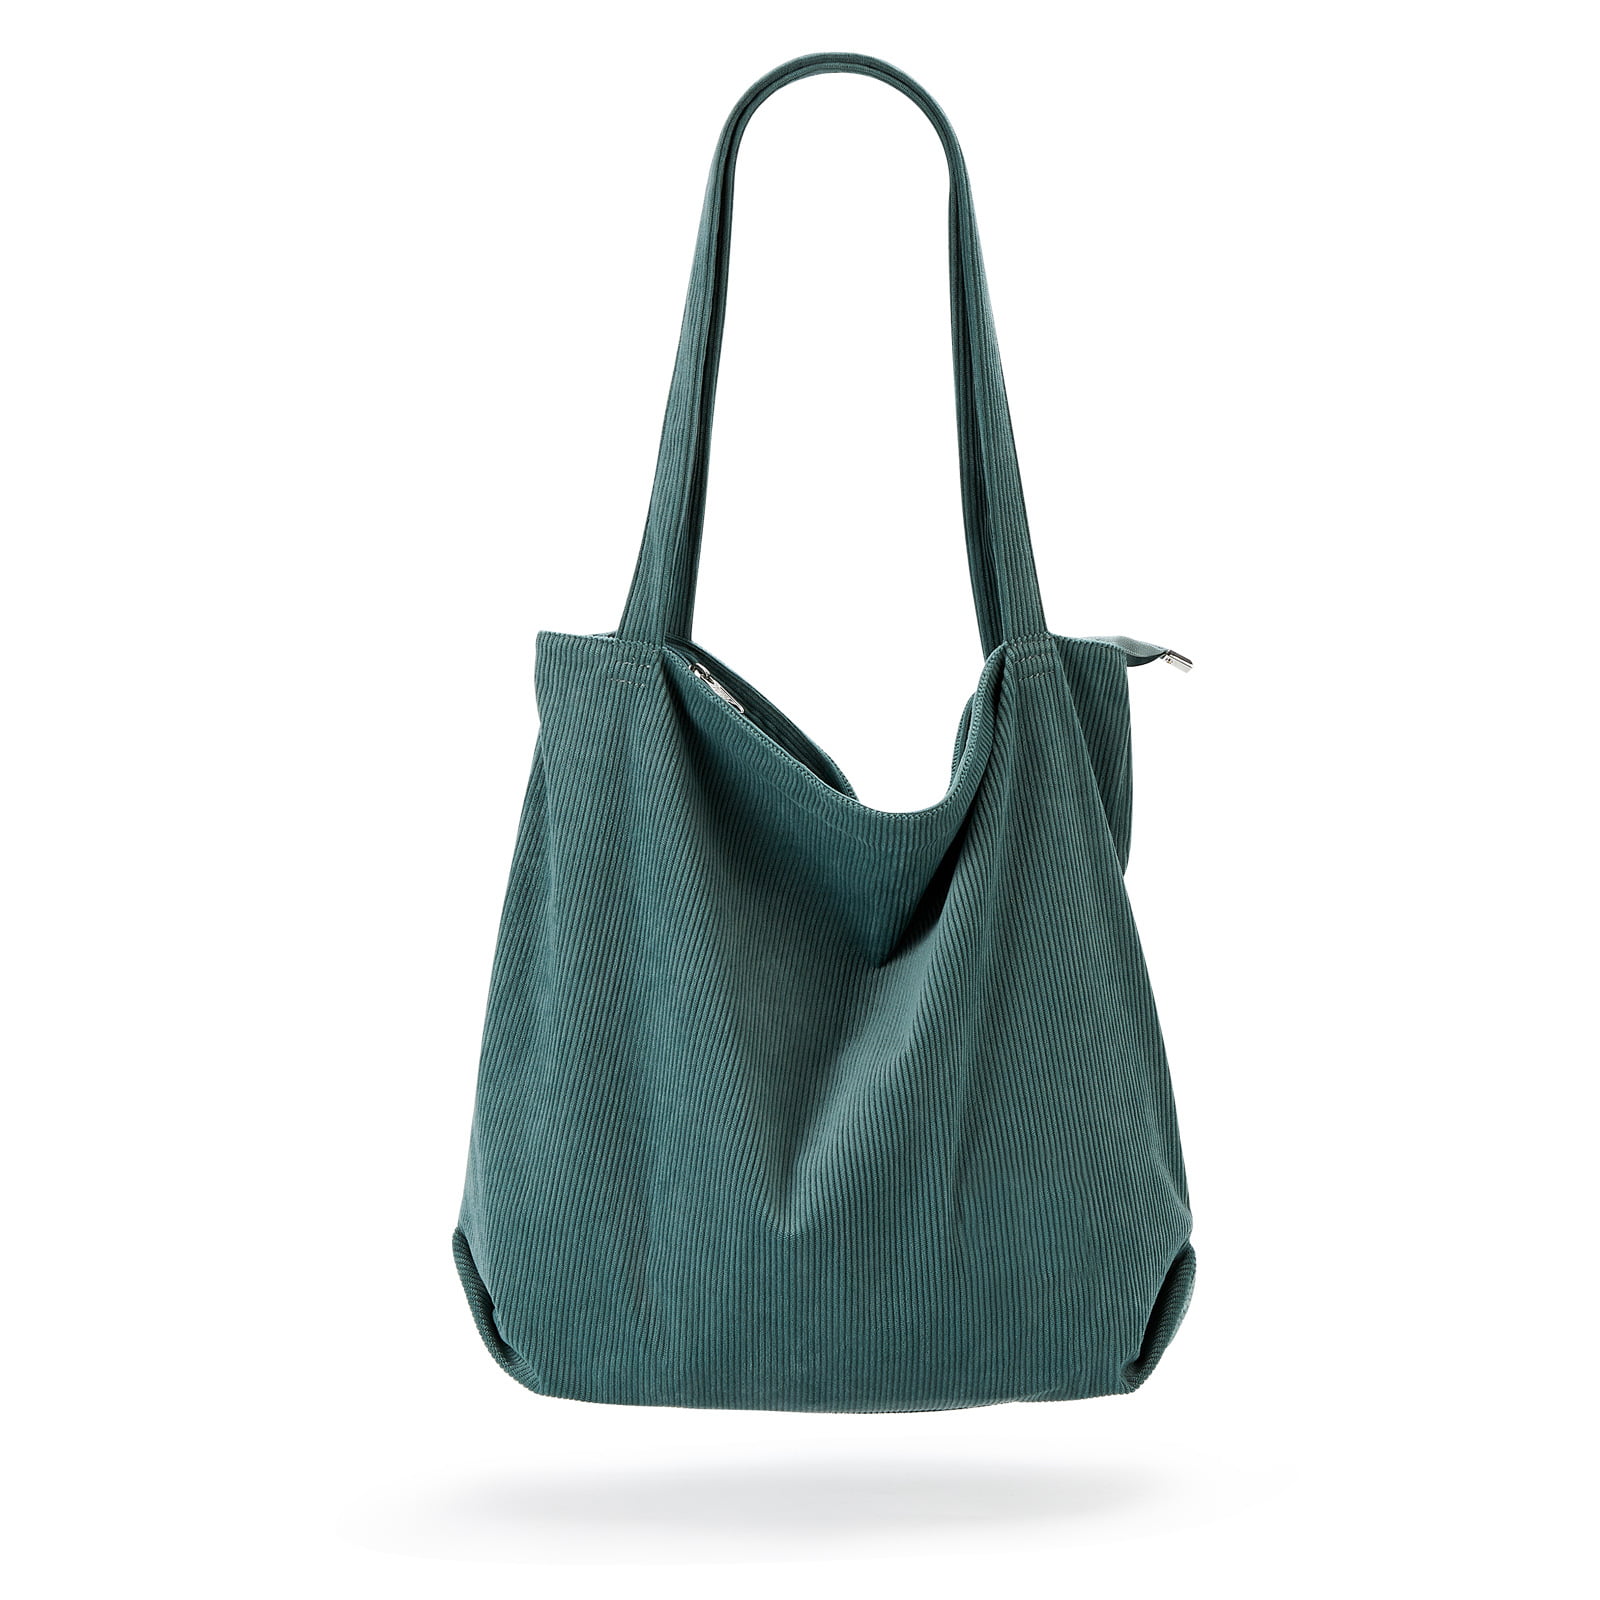 Fashionable Solid Color Large Capacity Tote Bag With Single Shoulder Strap